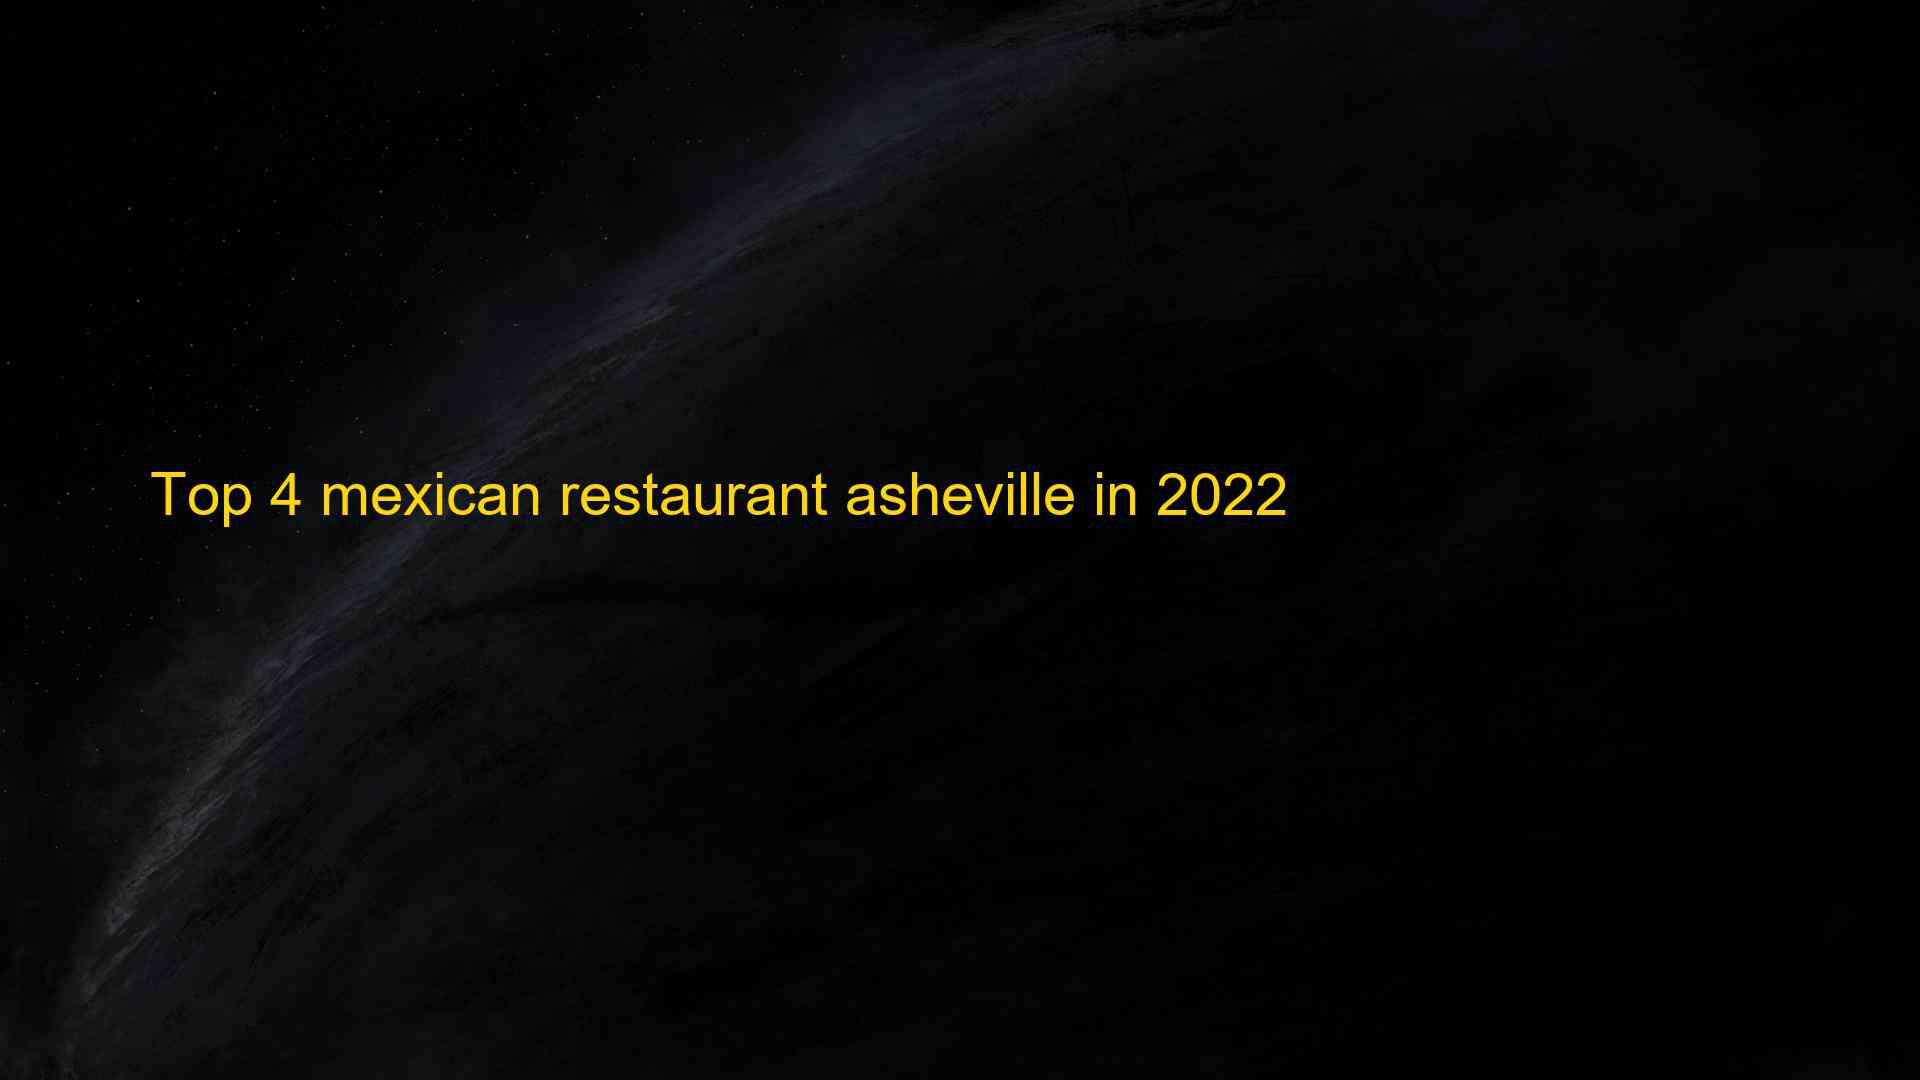 Top 4 mexican restaurant asheville in 2022 1663510813